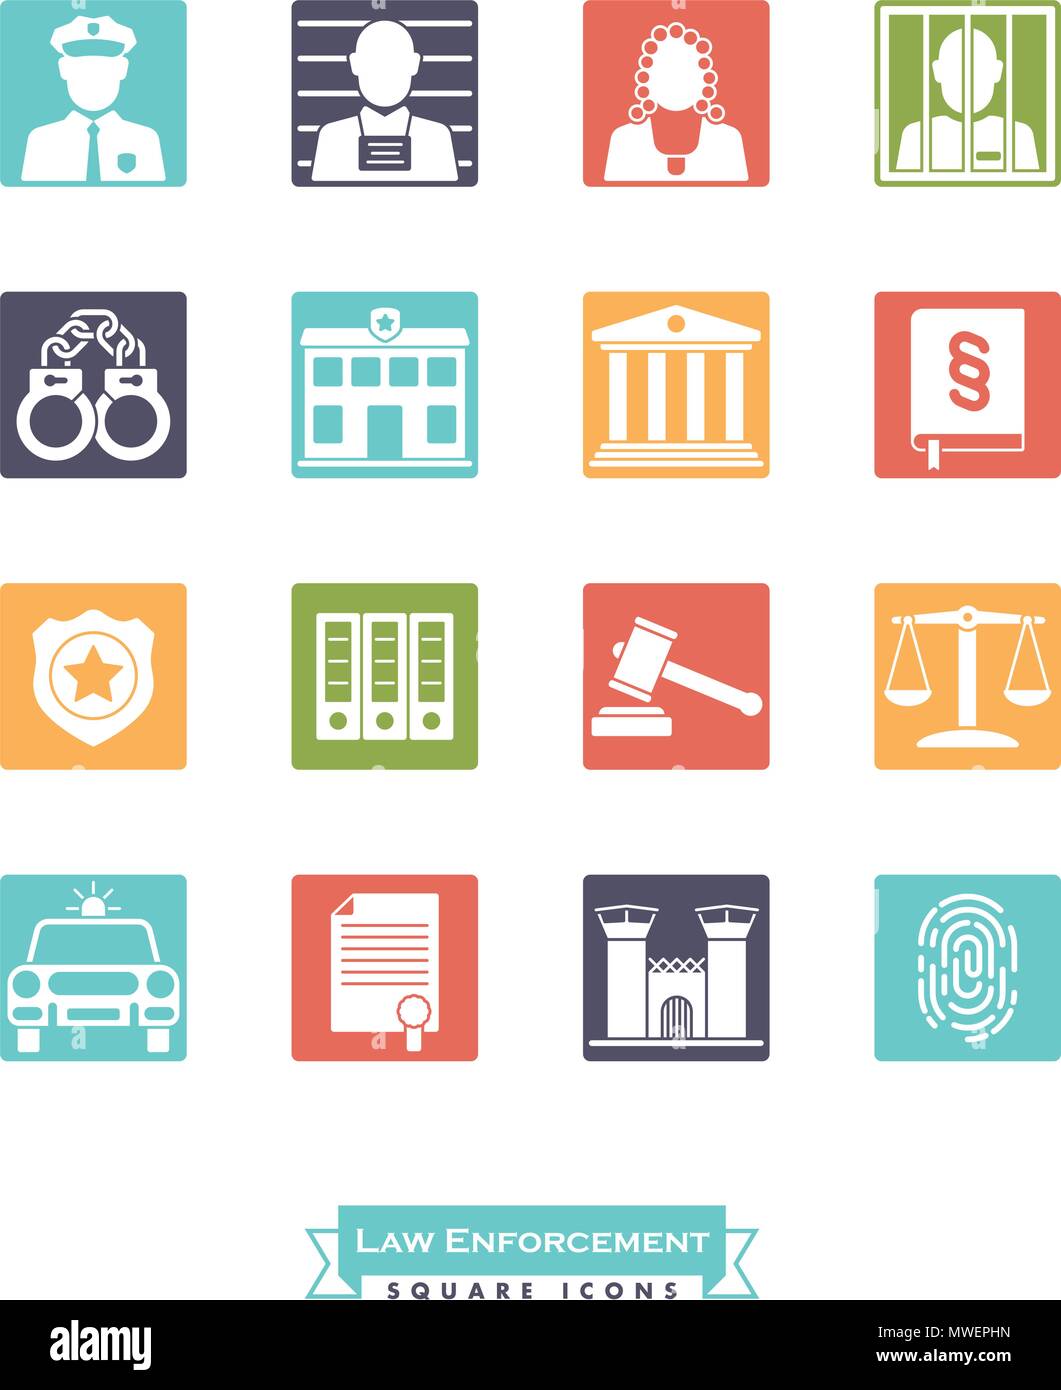 Collection of law enforcement icons. Criminal justice symbols, negative in coloed squares Stock Vector